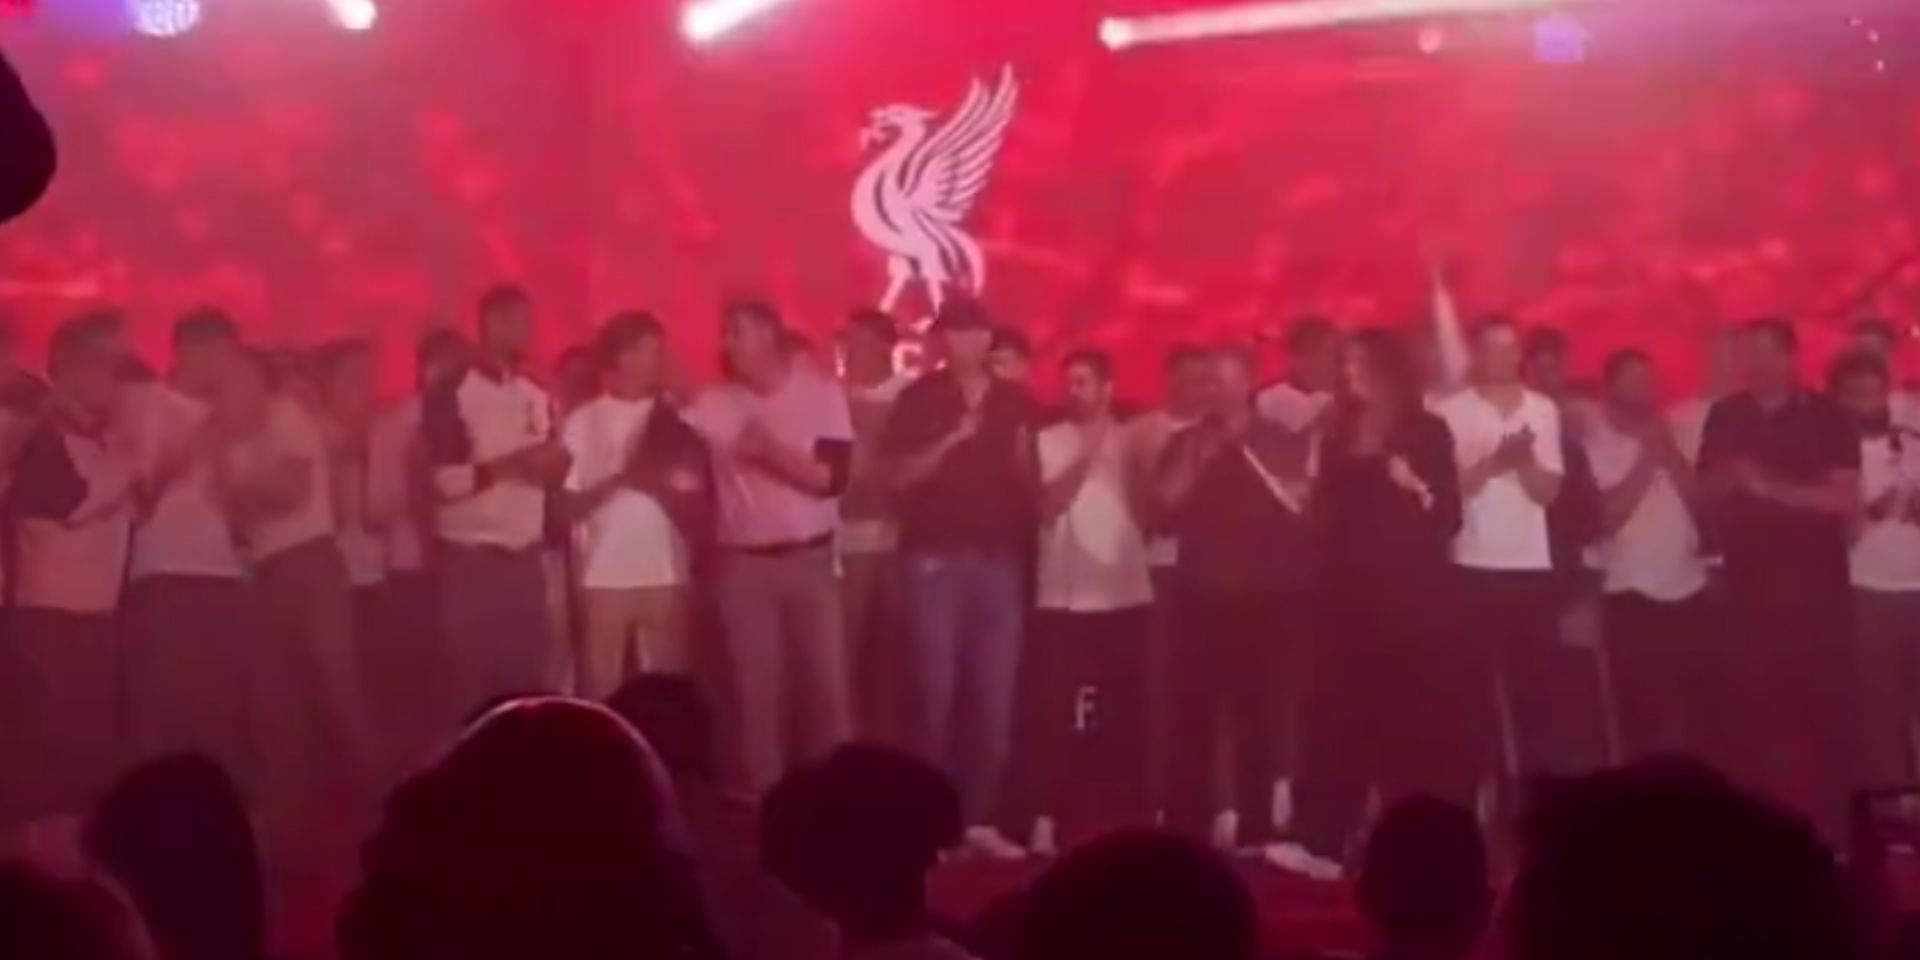 (Video) Liverpool players and staff unite for ‘simply the best’ at end of season party